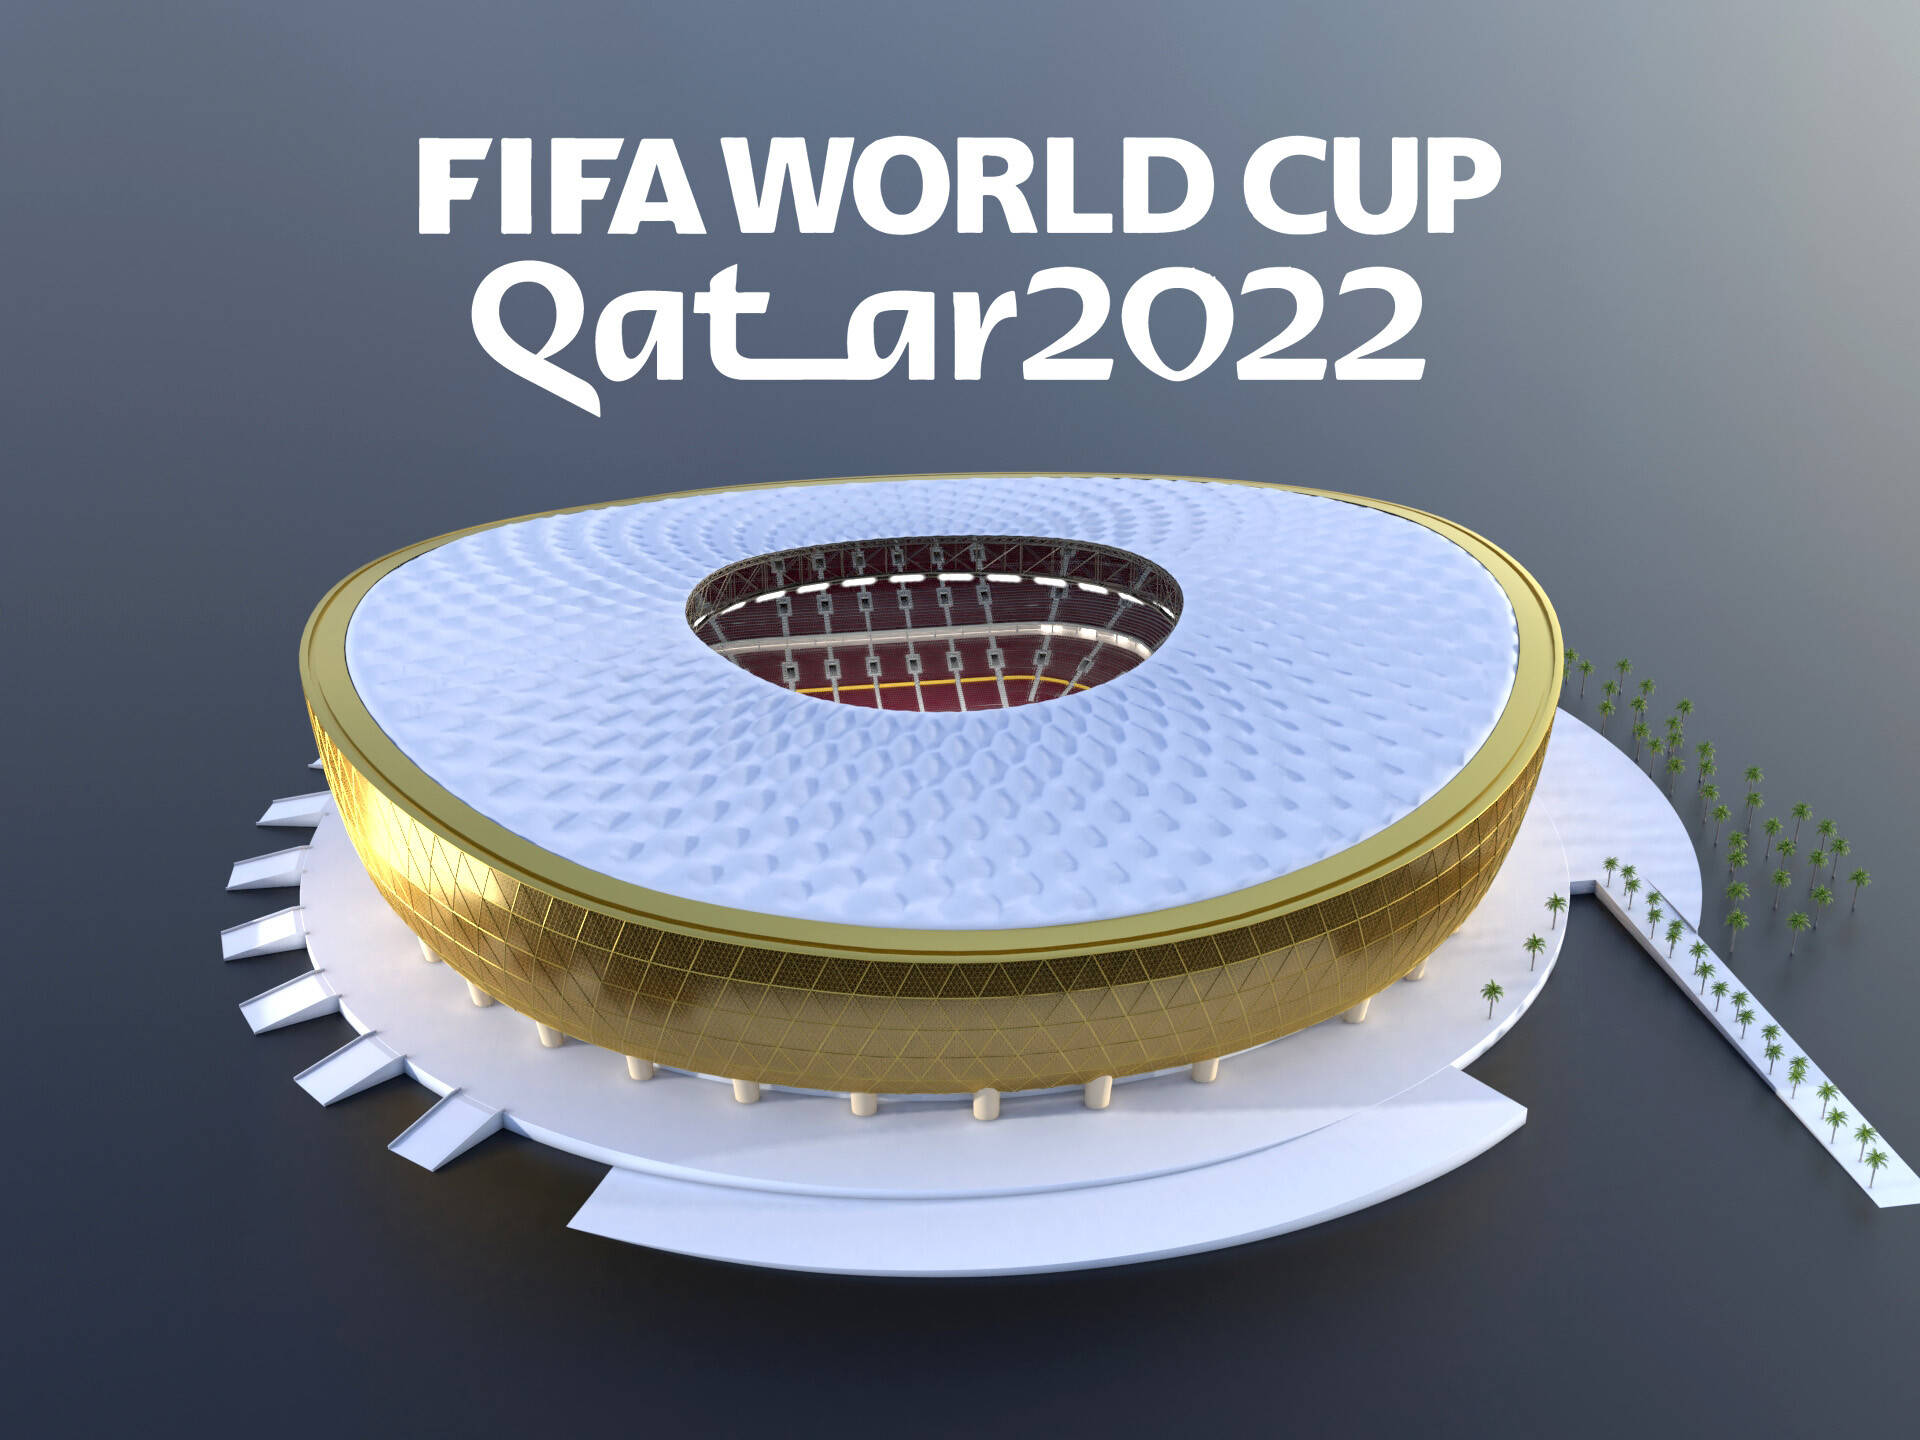 Gold Lusail Stadium: Home of the 2022 FIFA World Cup Wallpaper